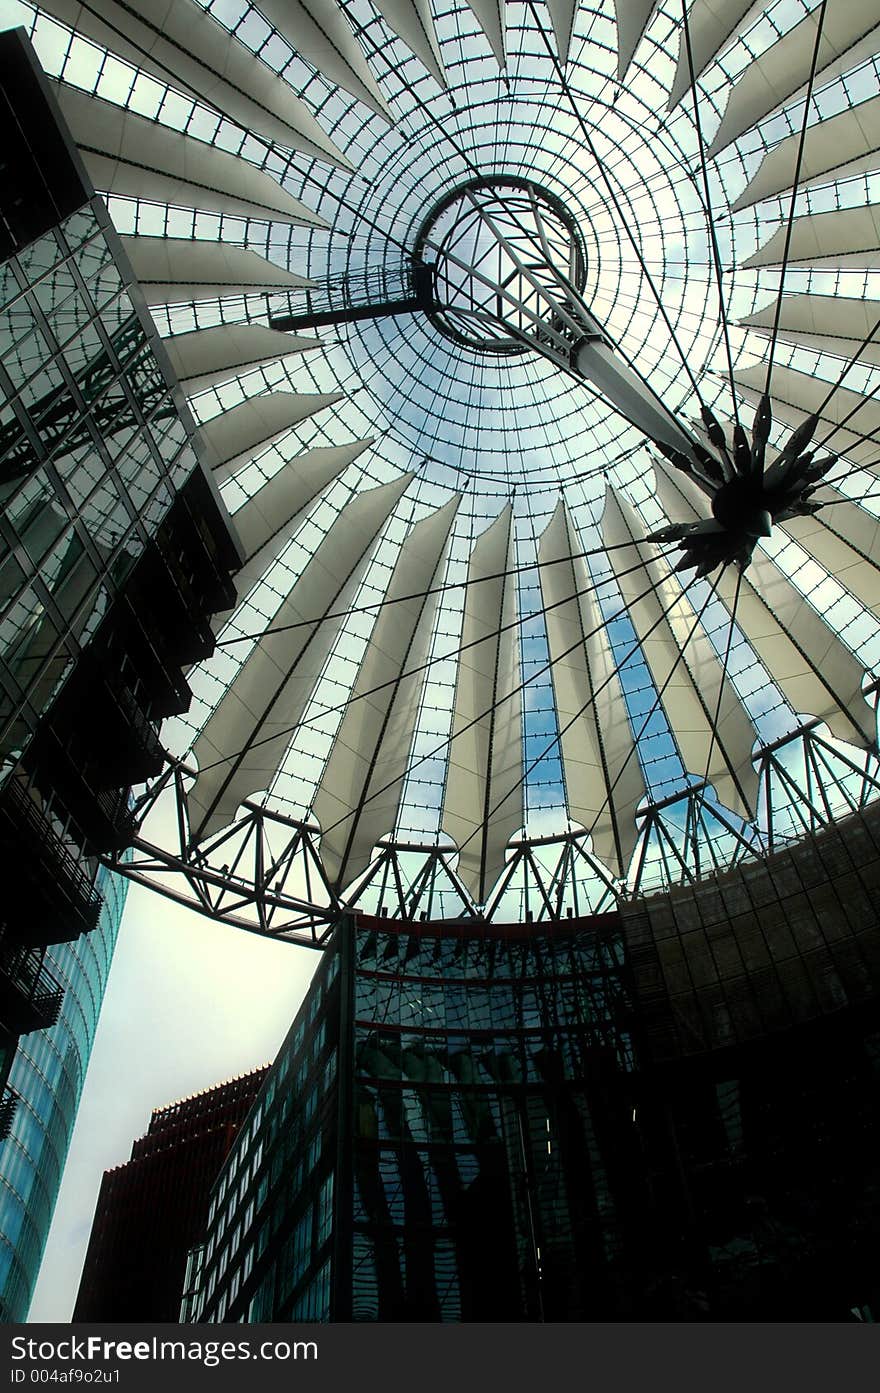 Hi-Tech/Modern architecture of the Sony Center in Berlin